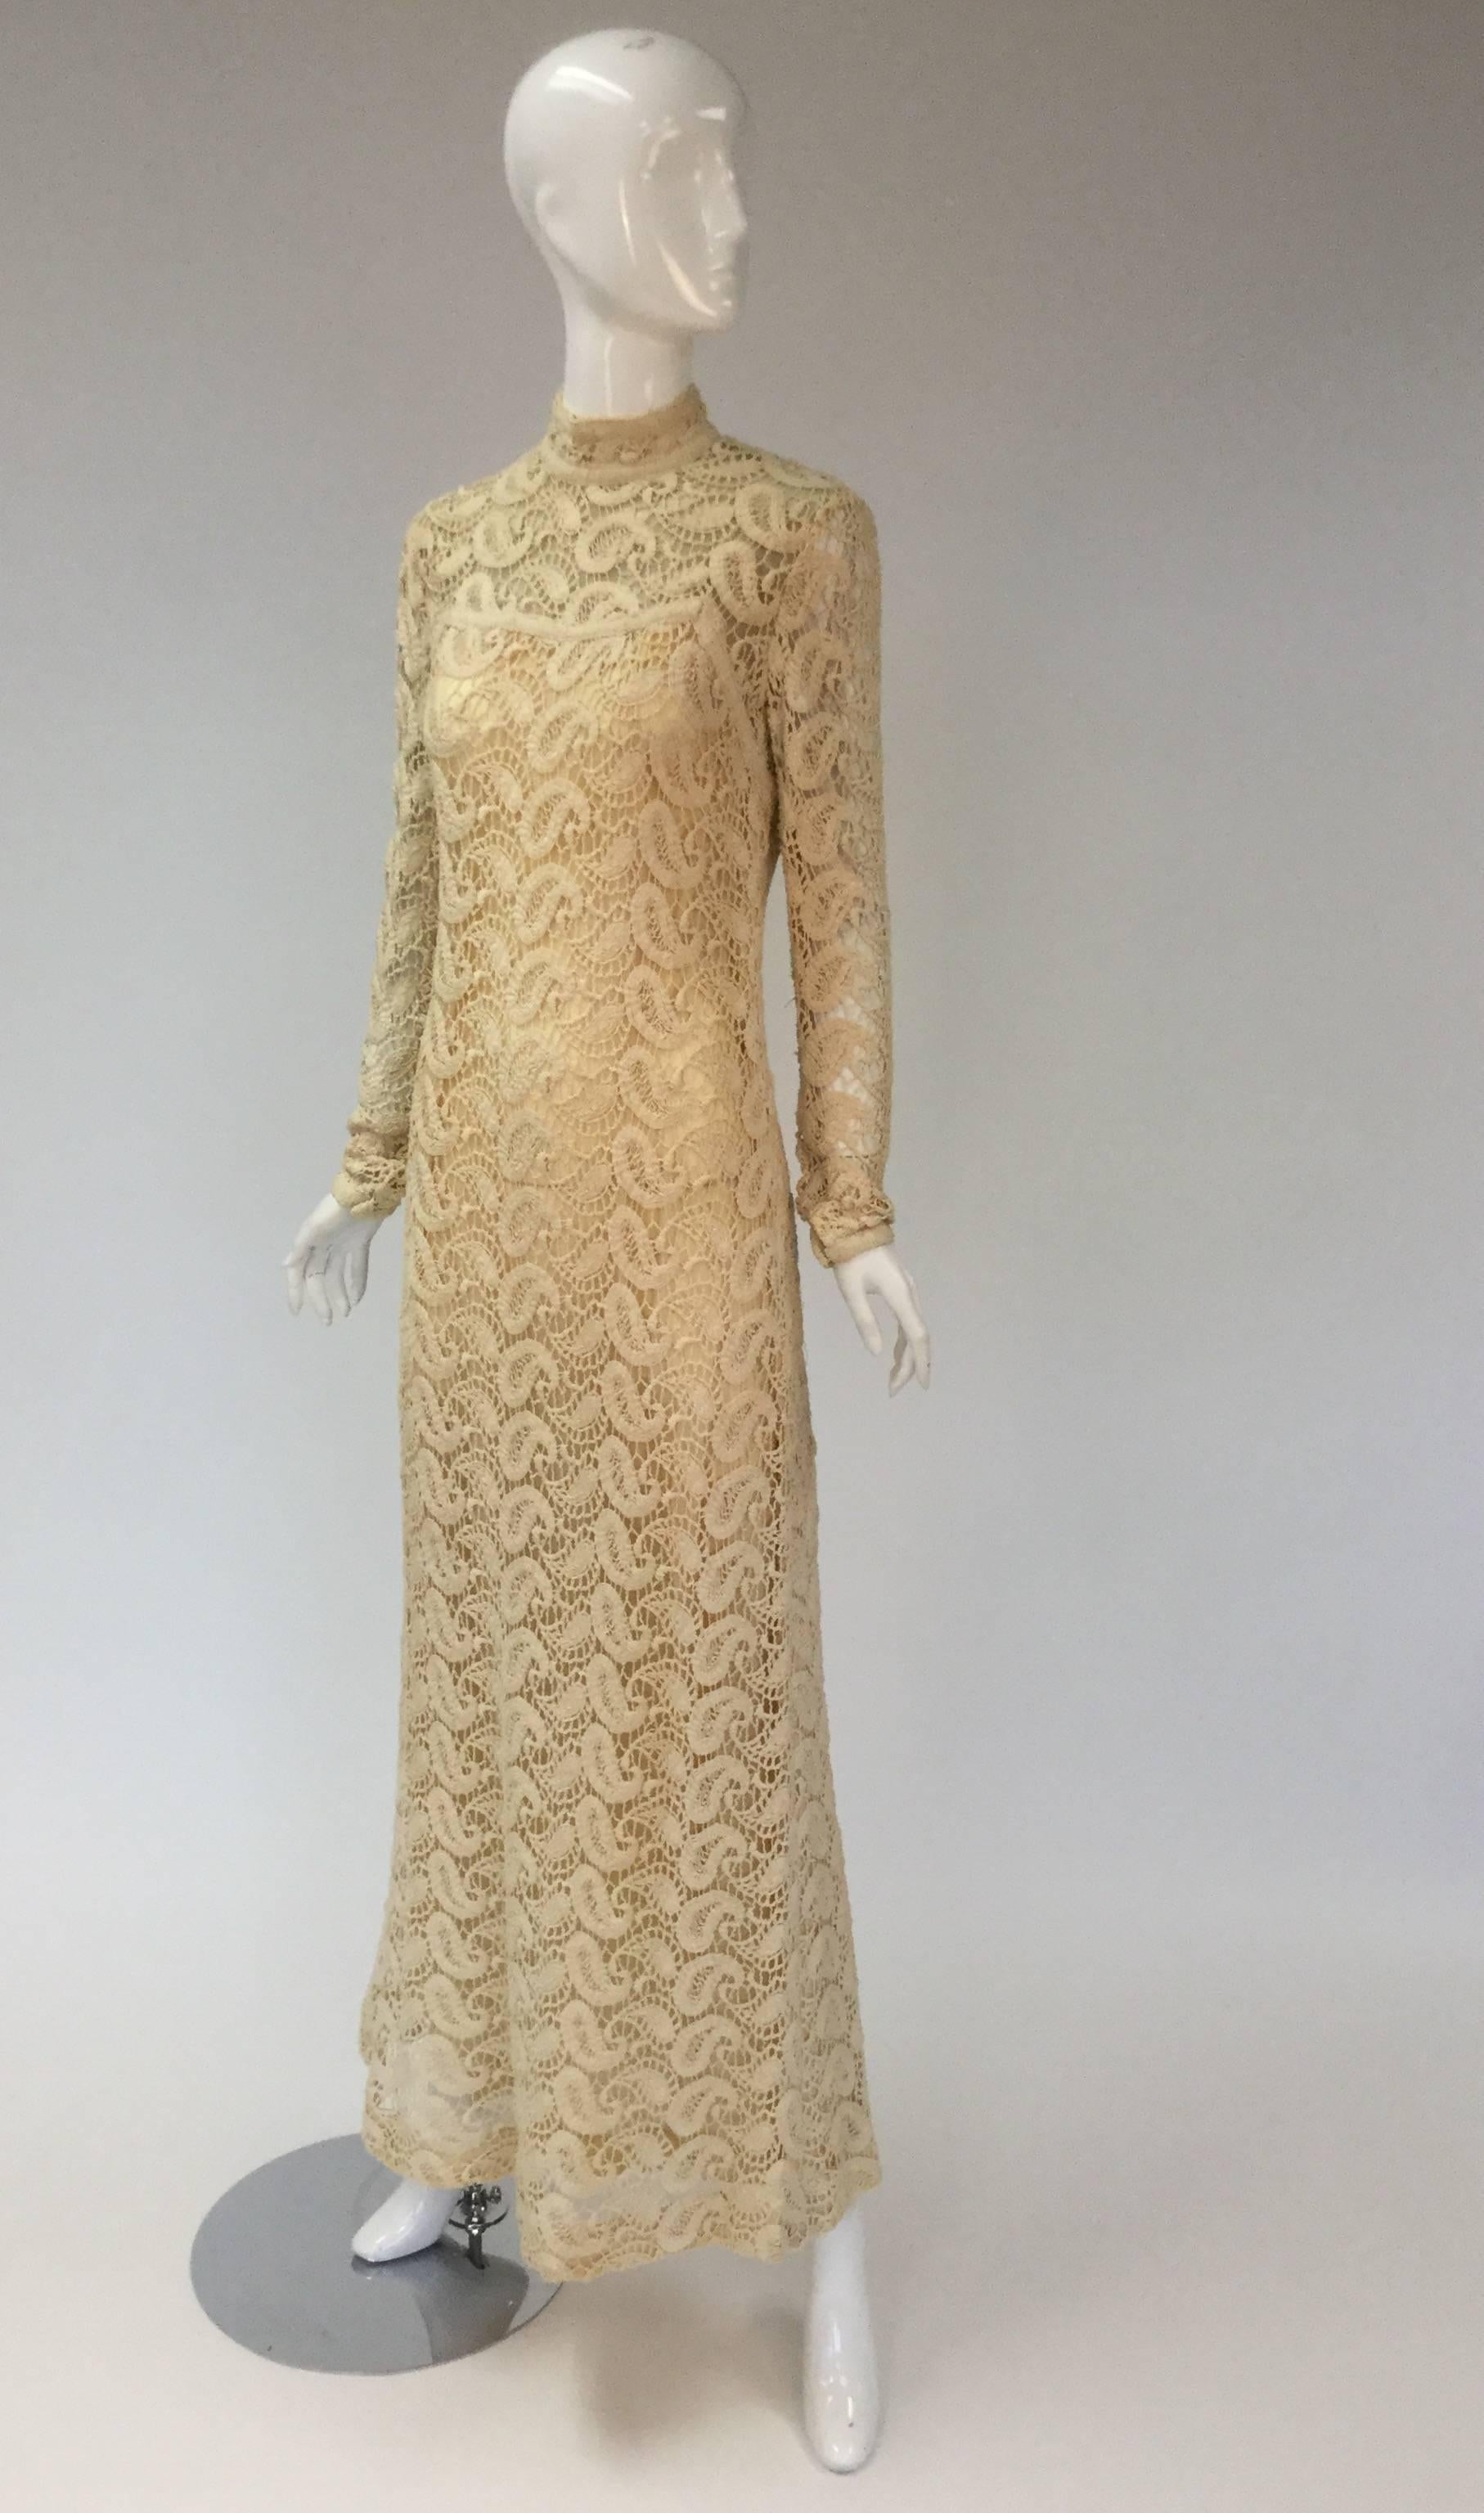 Beautiful Ivory paisley crochet dress from Fred Perlberg Originals.  Boho chic with a modest vibe because of the dress' high neckline with flattering straight silhouette.

Lined from neck down, and a double lining from the bust to floor. Unlined